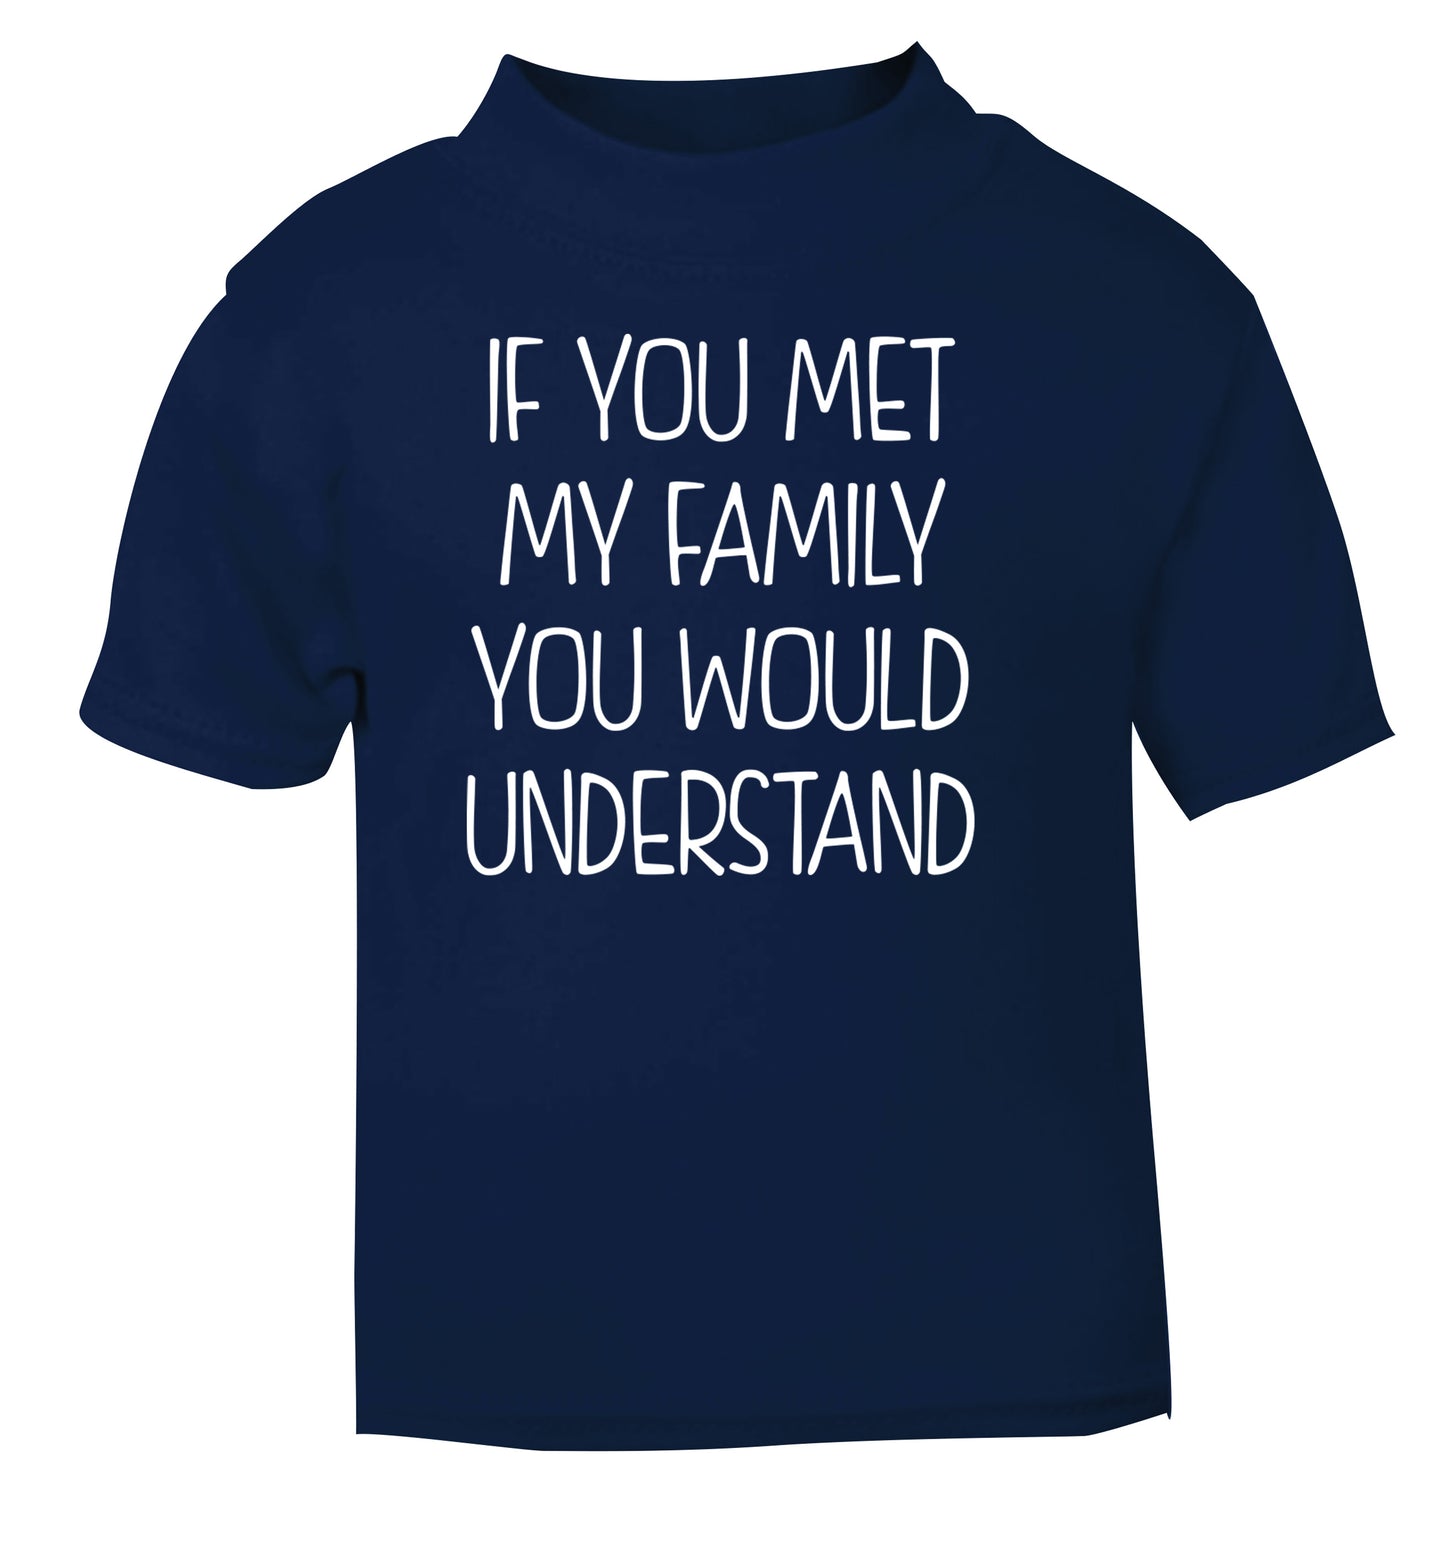 If you met my family you would understand navy Baby Toddler Tshirt 2 Years